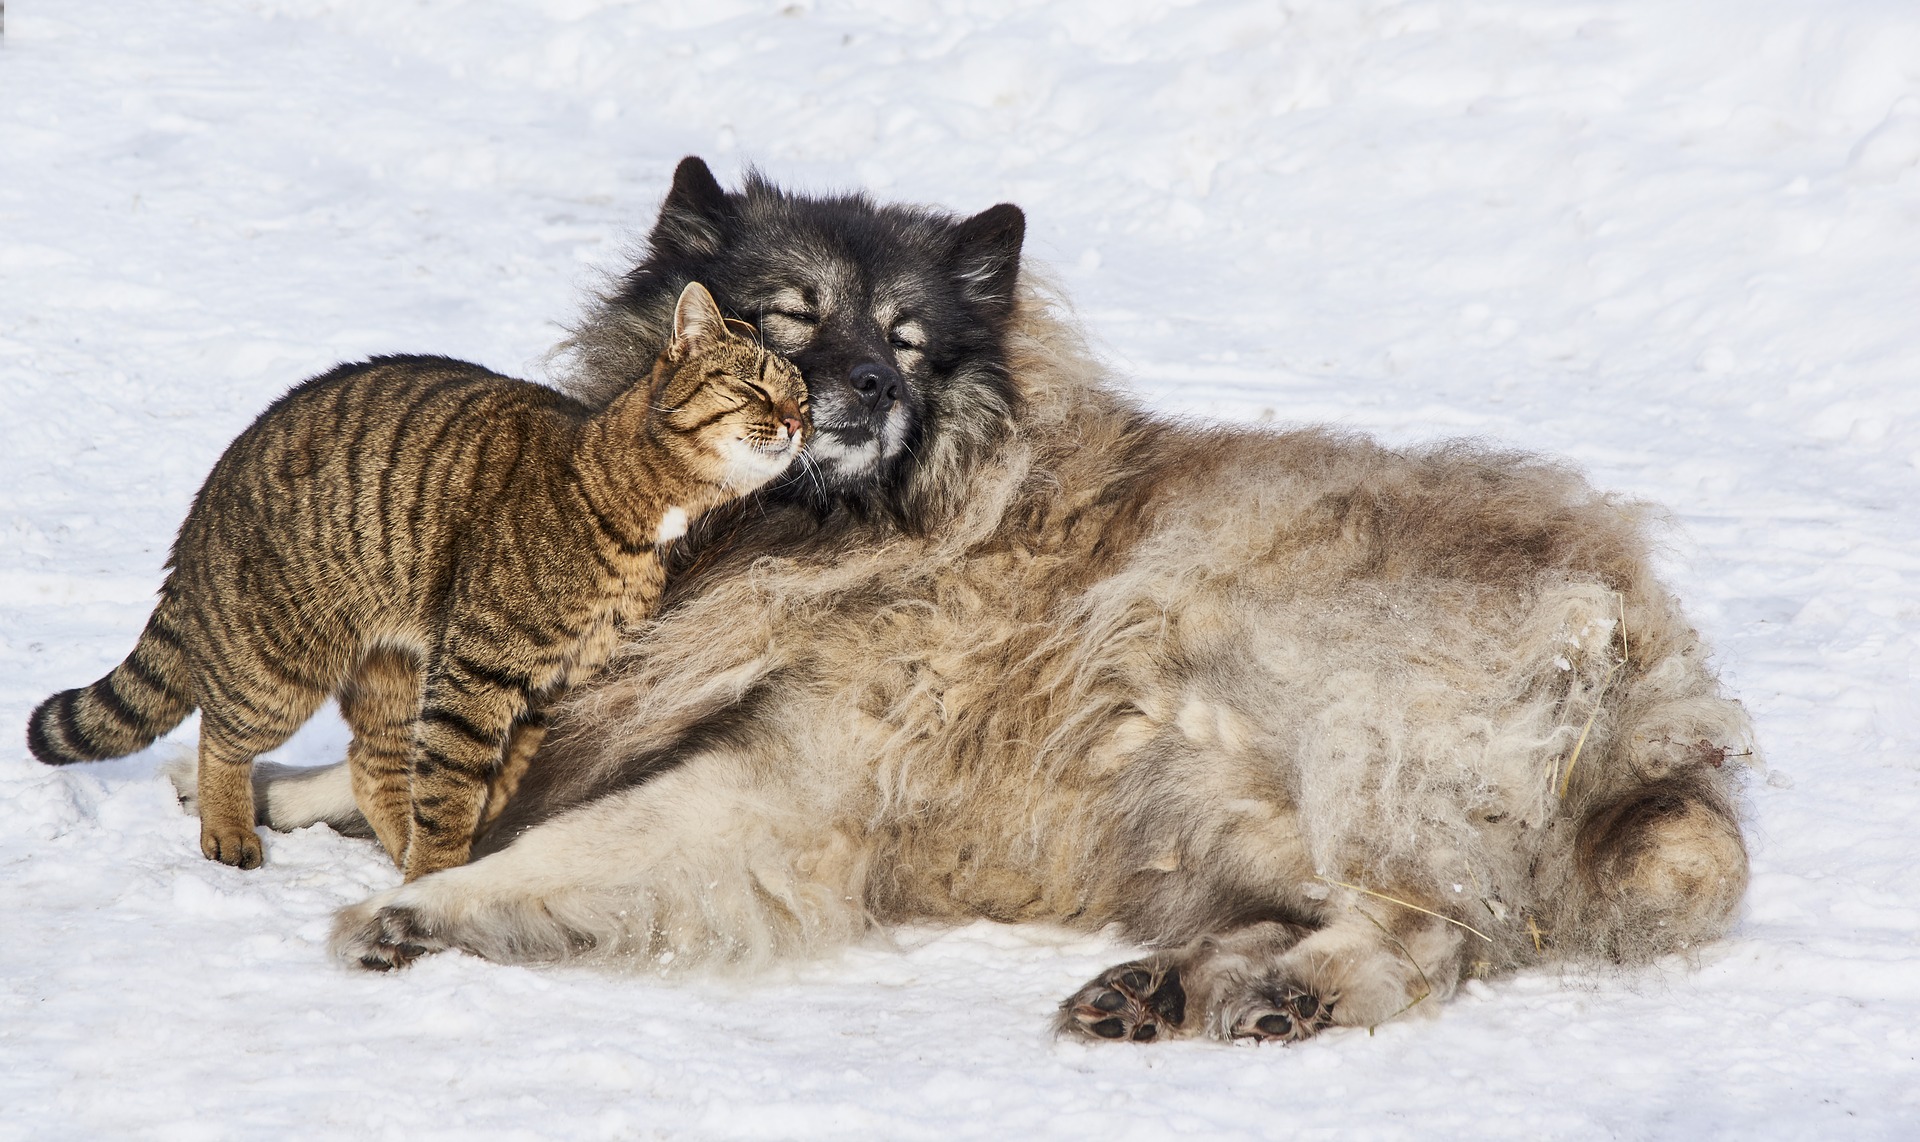 A cat and dog cuddling in the snow